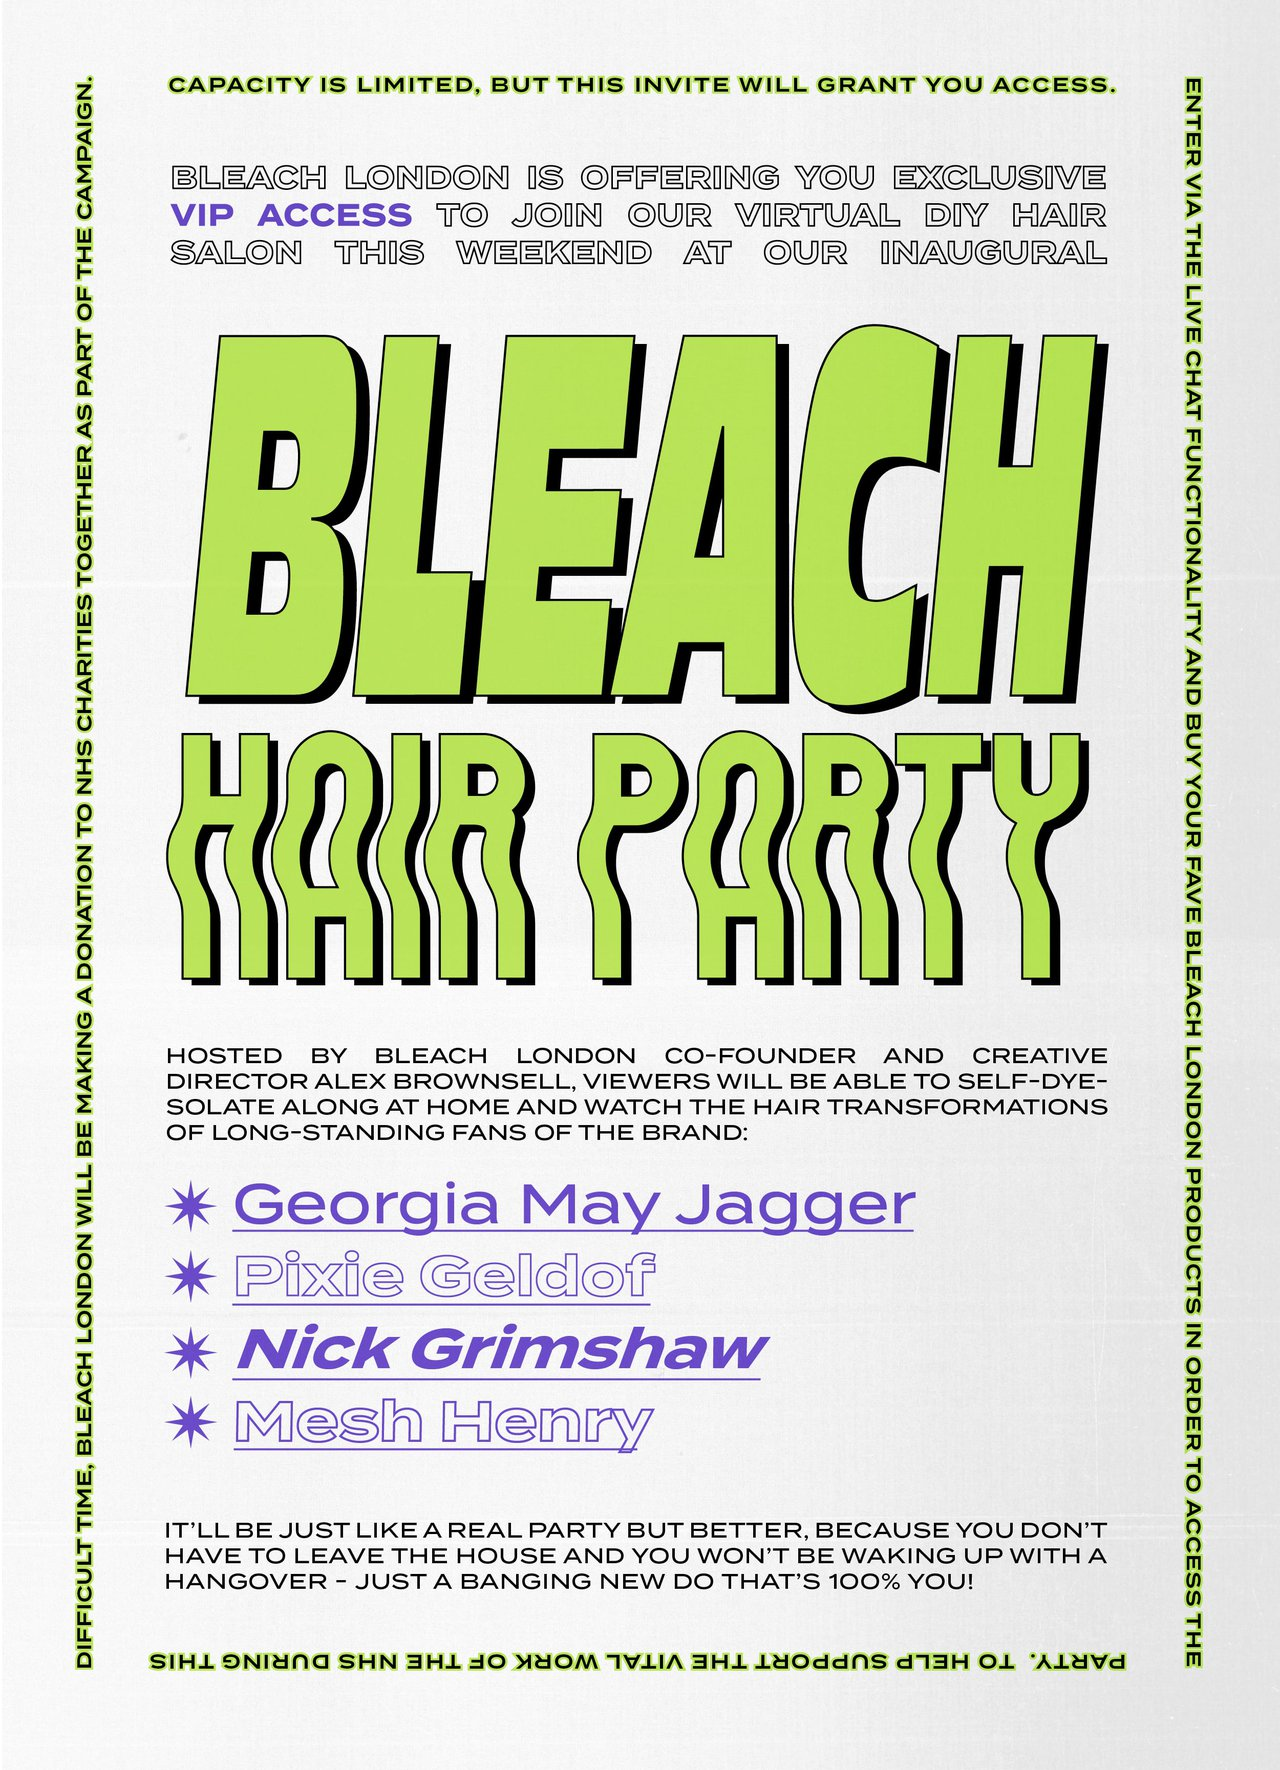 Bleach London's Hair Party roused a big crowd online